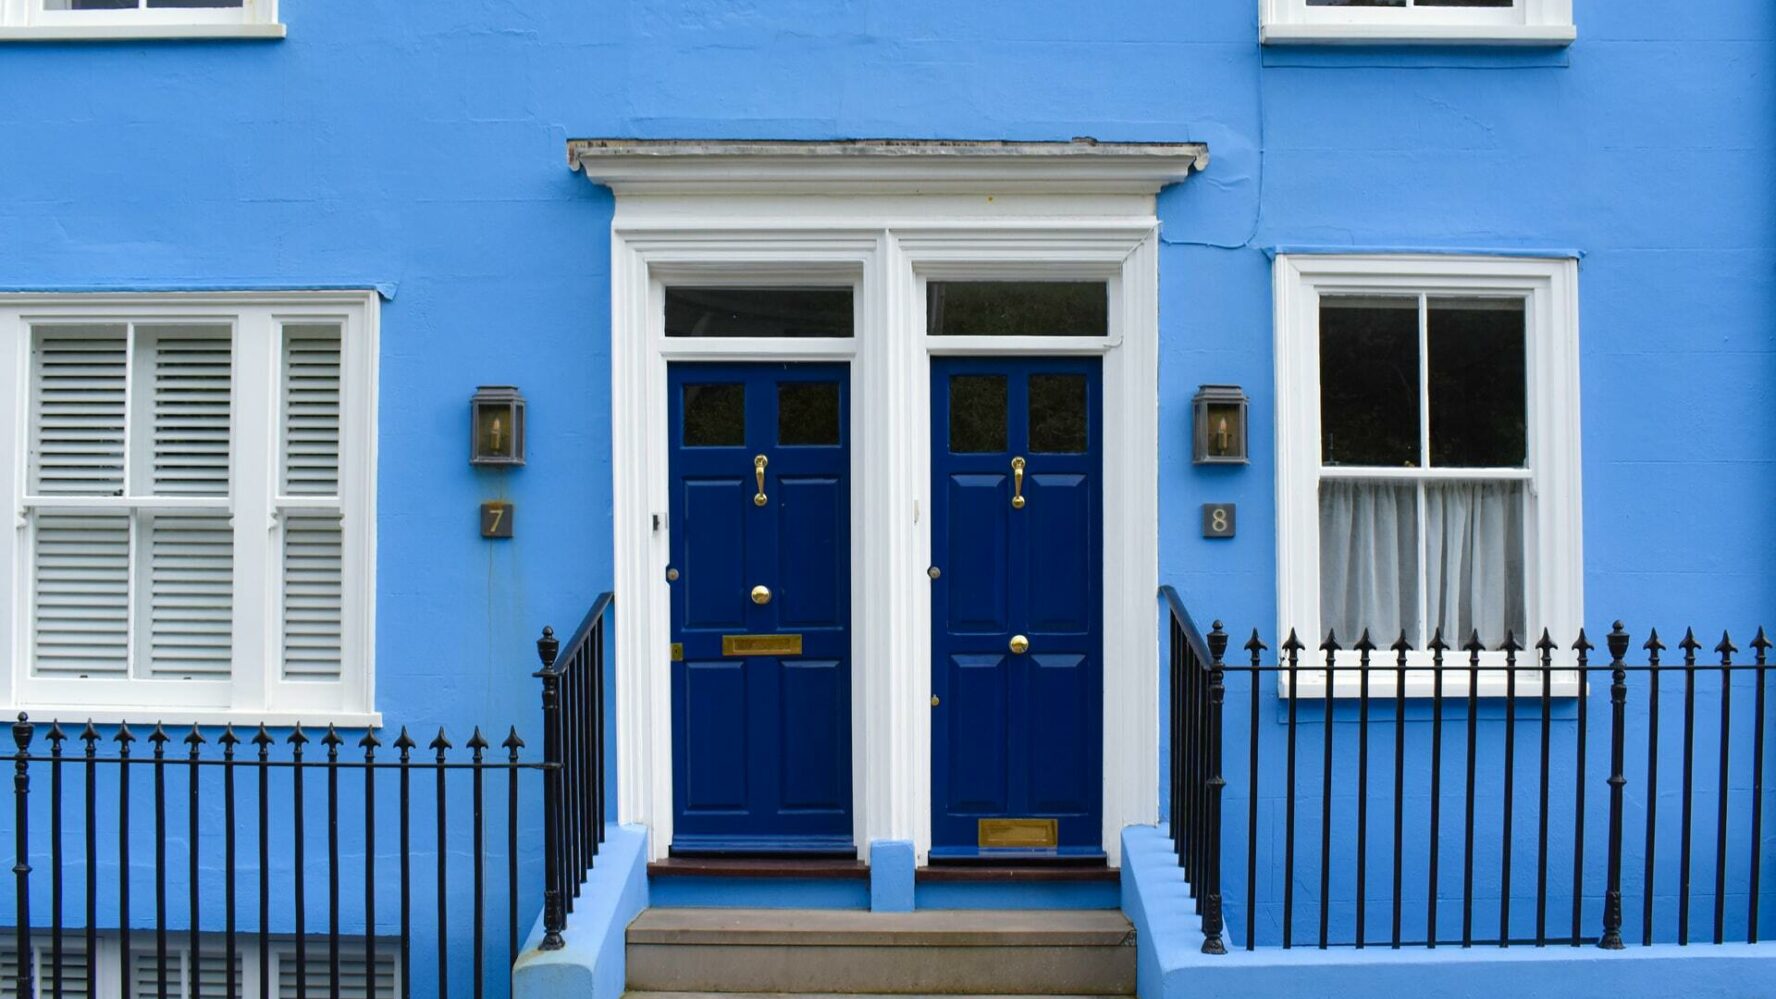 Two blue front doors with blue walls.